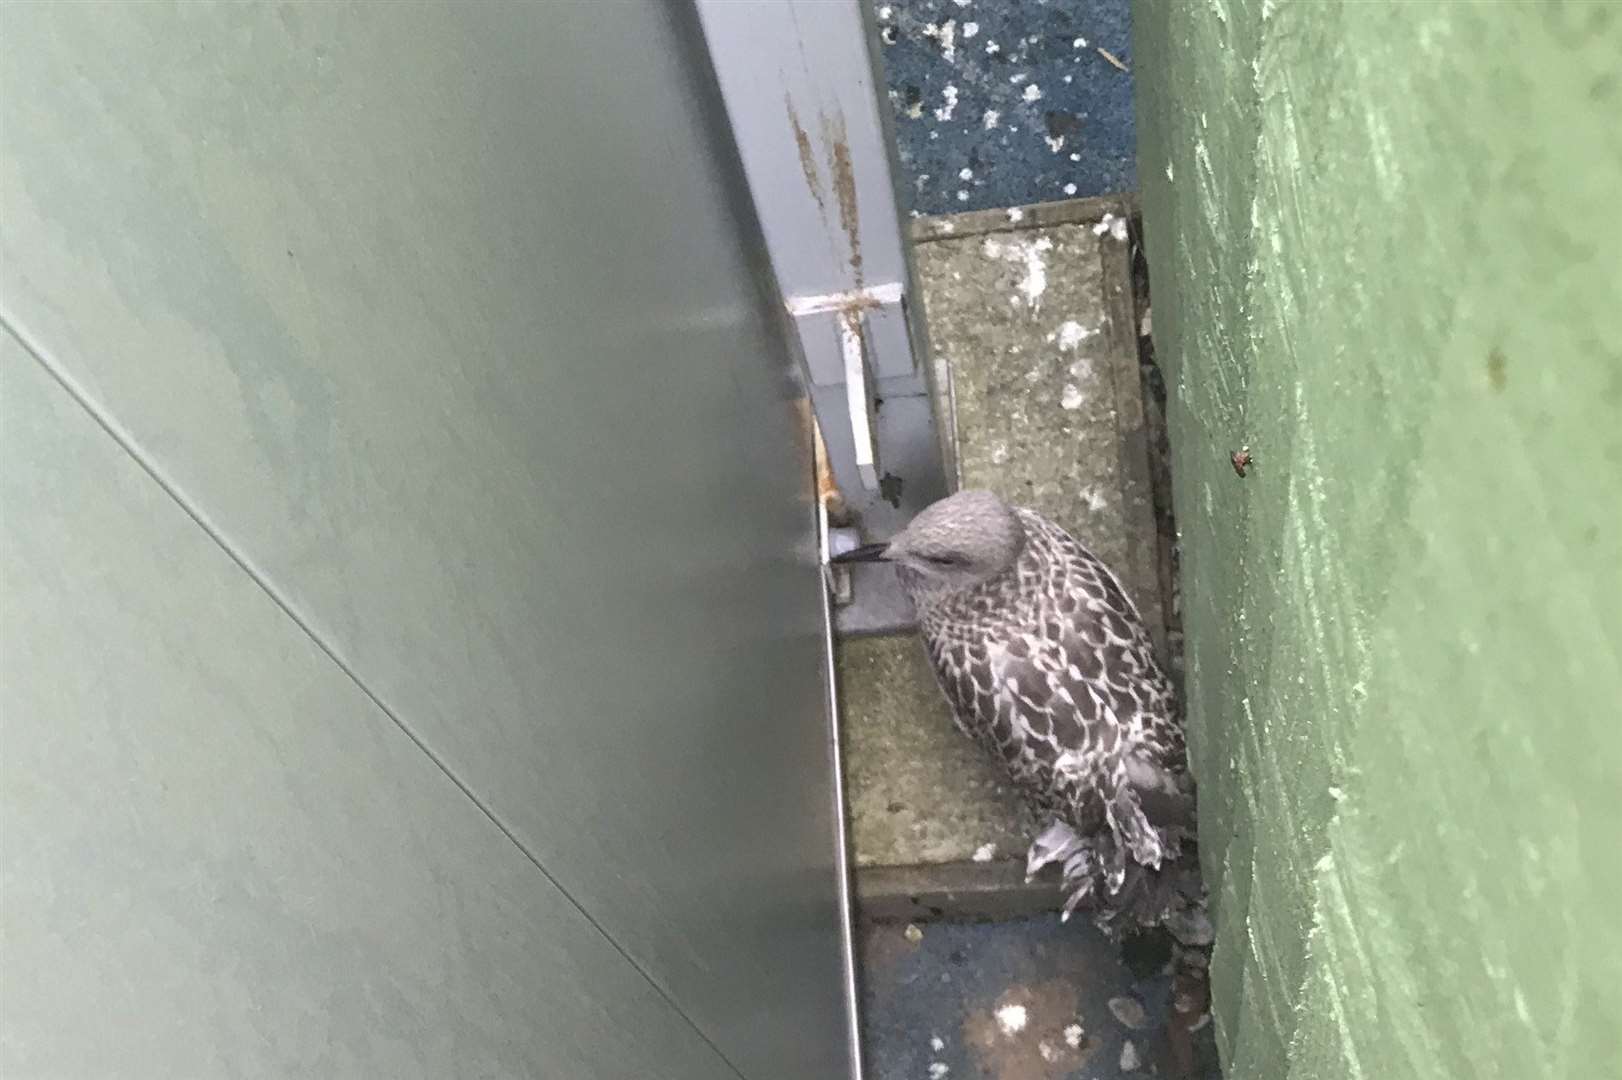 The poor seagull stuck in a narrow gap. Picture: RSPCA